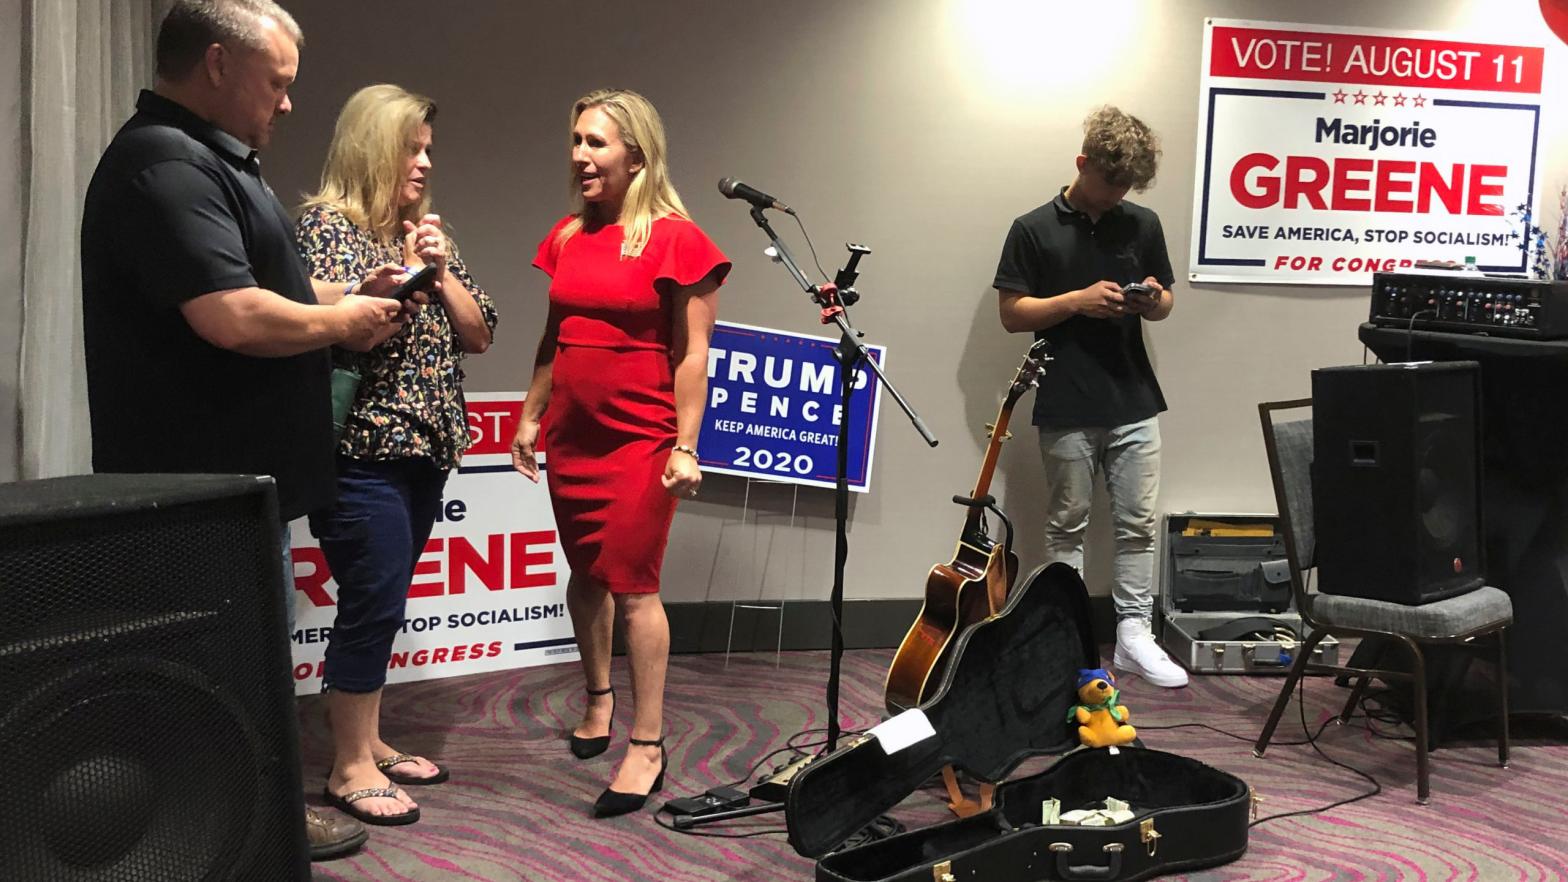 QAnon conspiracy theorist Marjorie Taylor Greene, seen in red, at an election event at Rome, Georgia in August 2020. (Photo: Mike Stewart, AP)